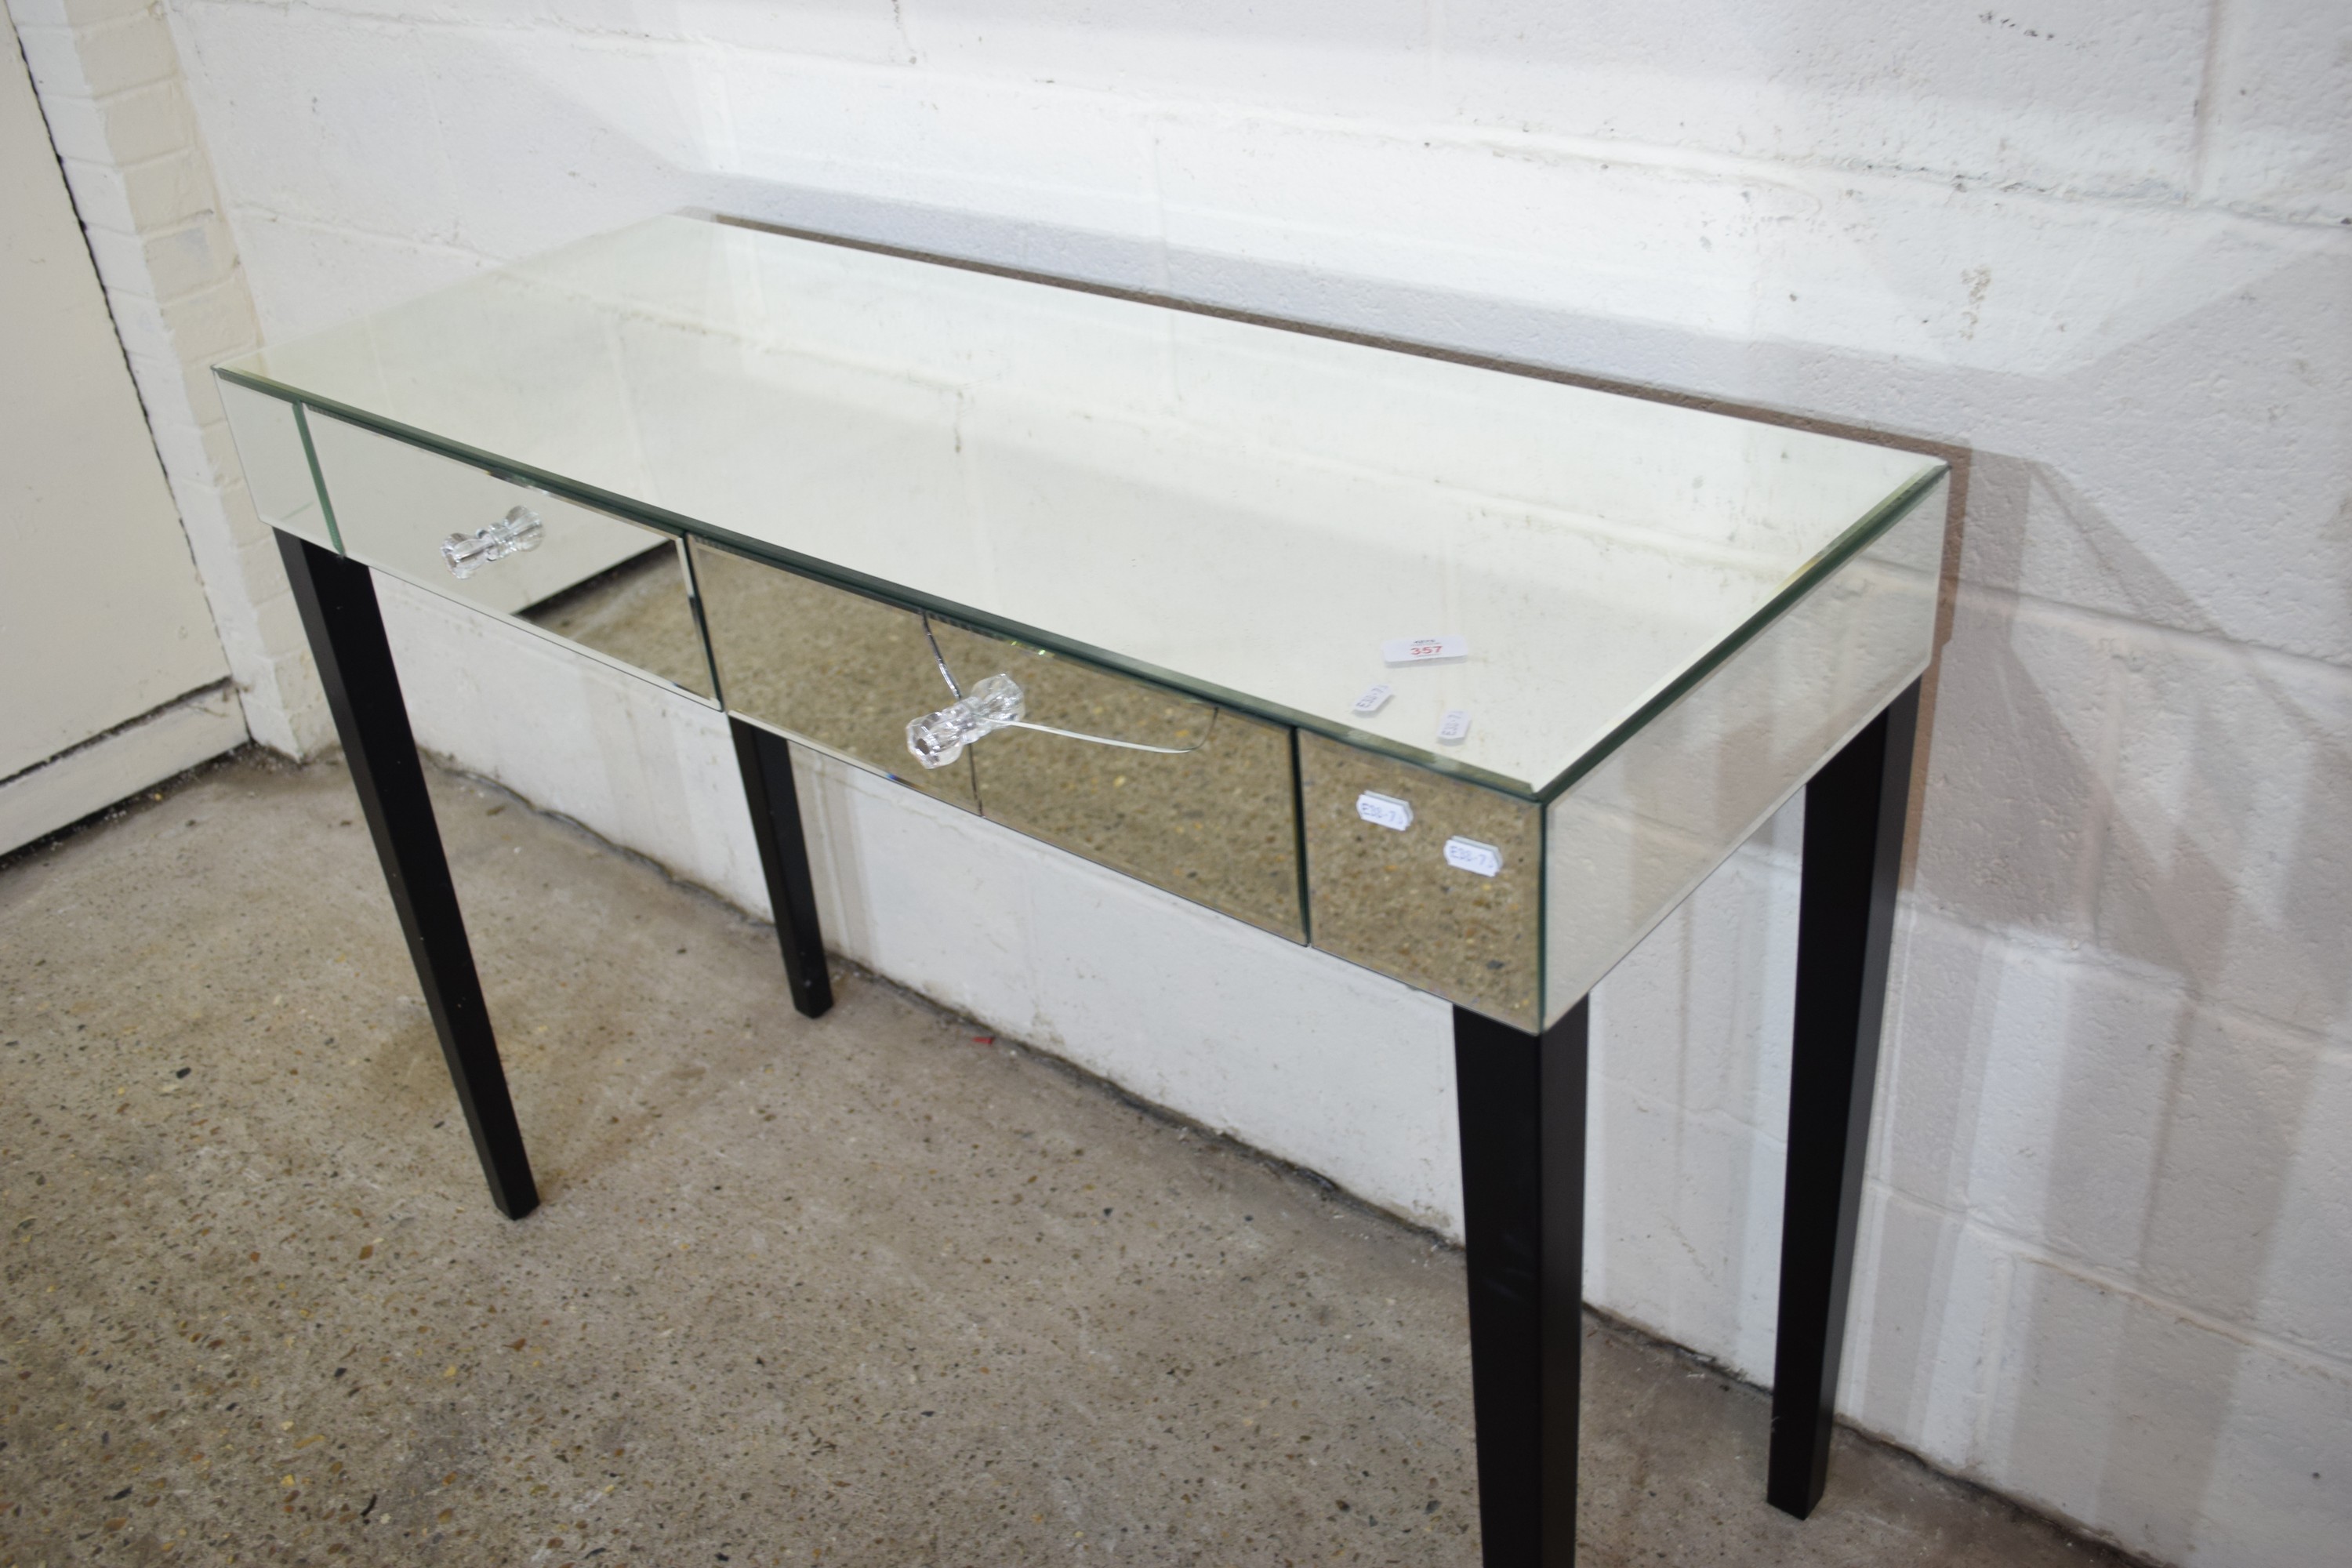 MIRROR EFFECT SIDE TABLE WITH TWO DRAWERS BENEATH, APPROX 112 X 42CM - Image 2 of 2